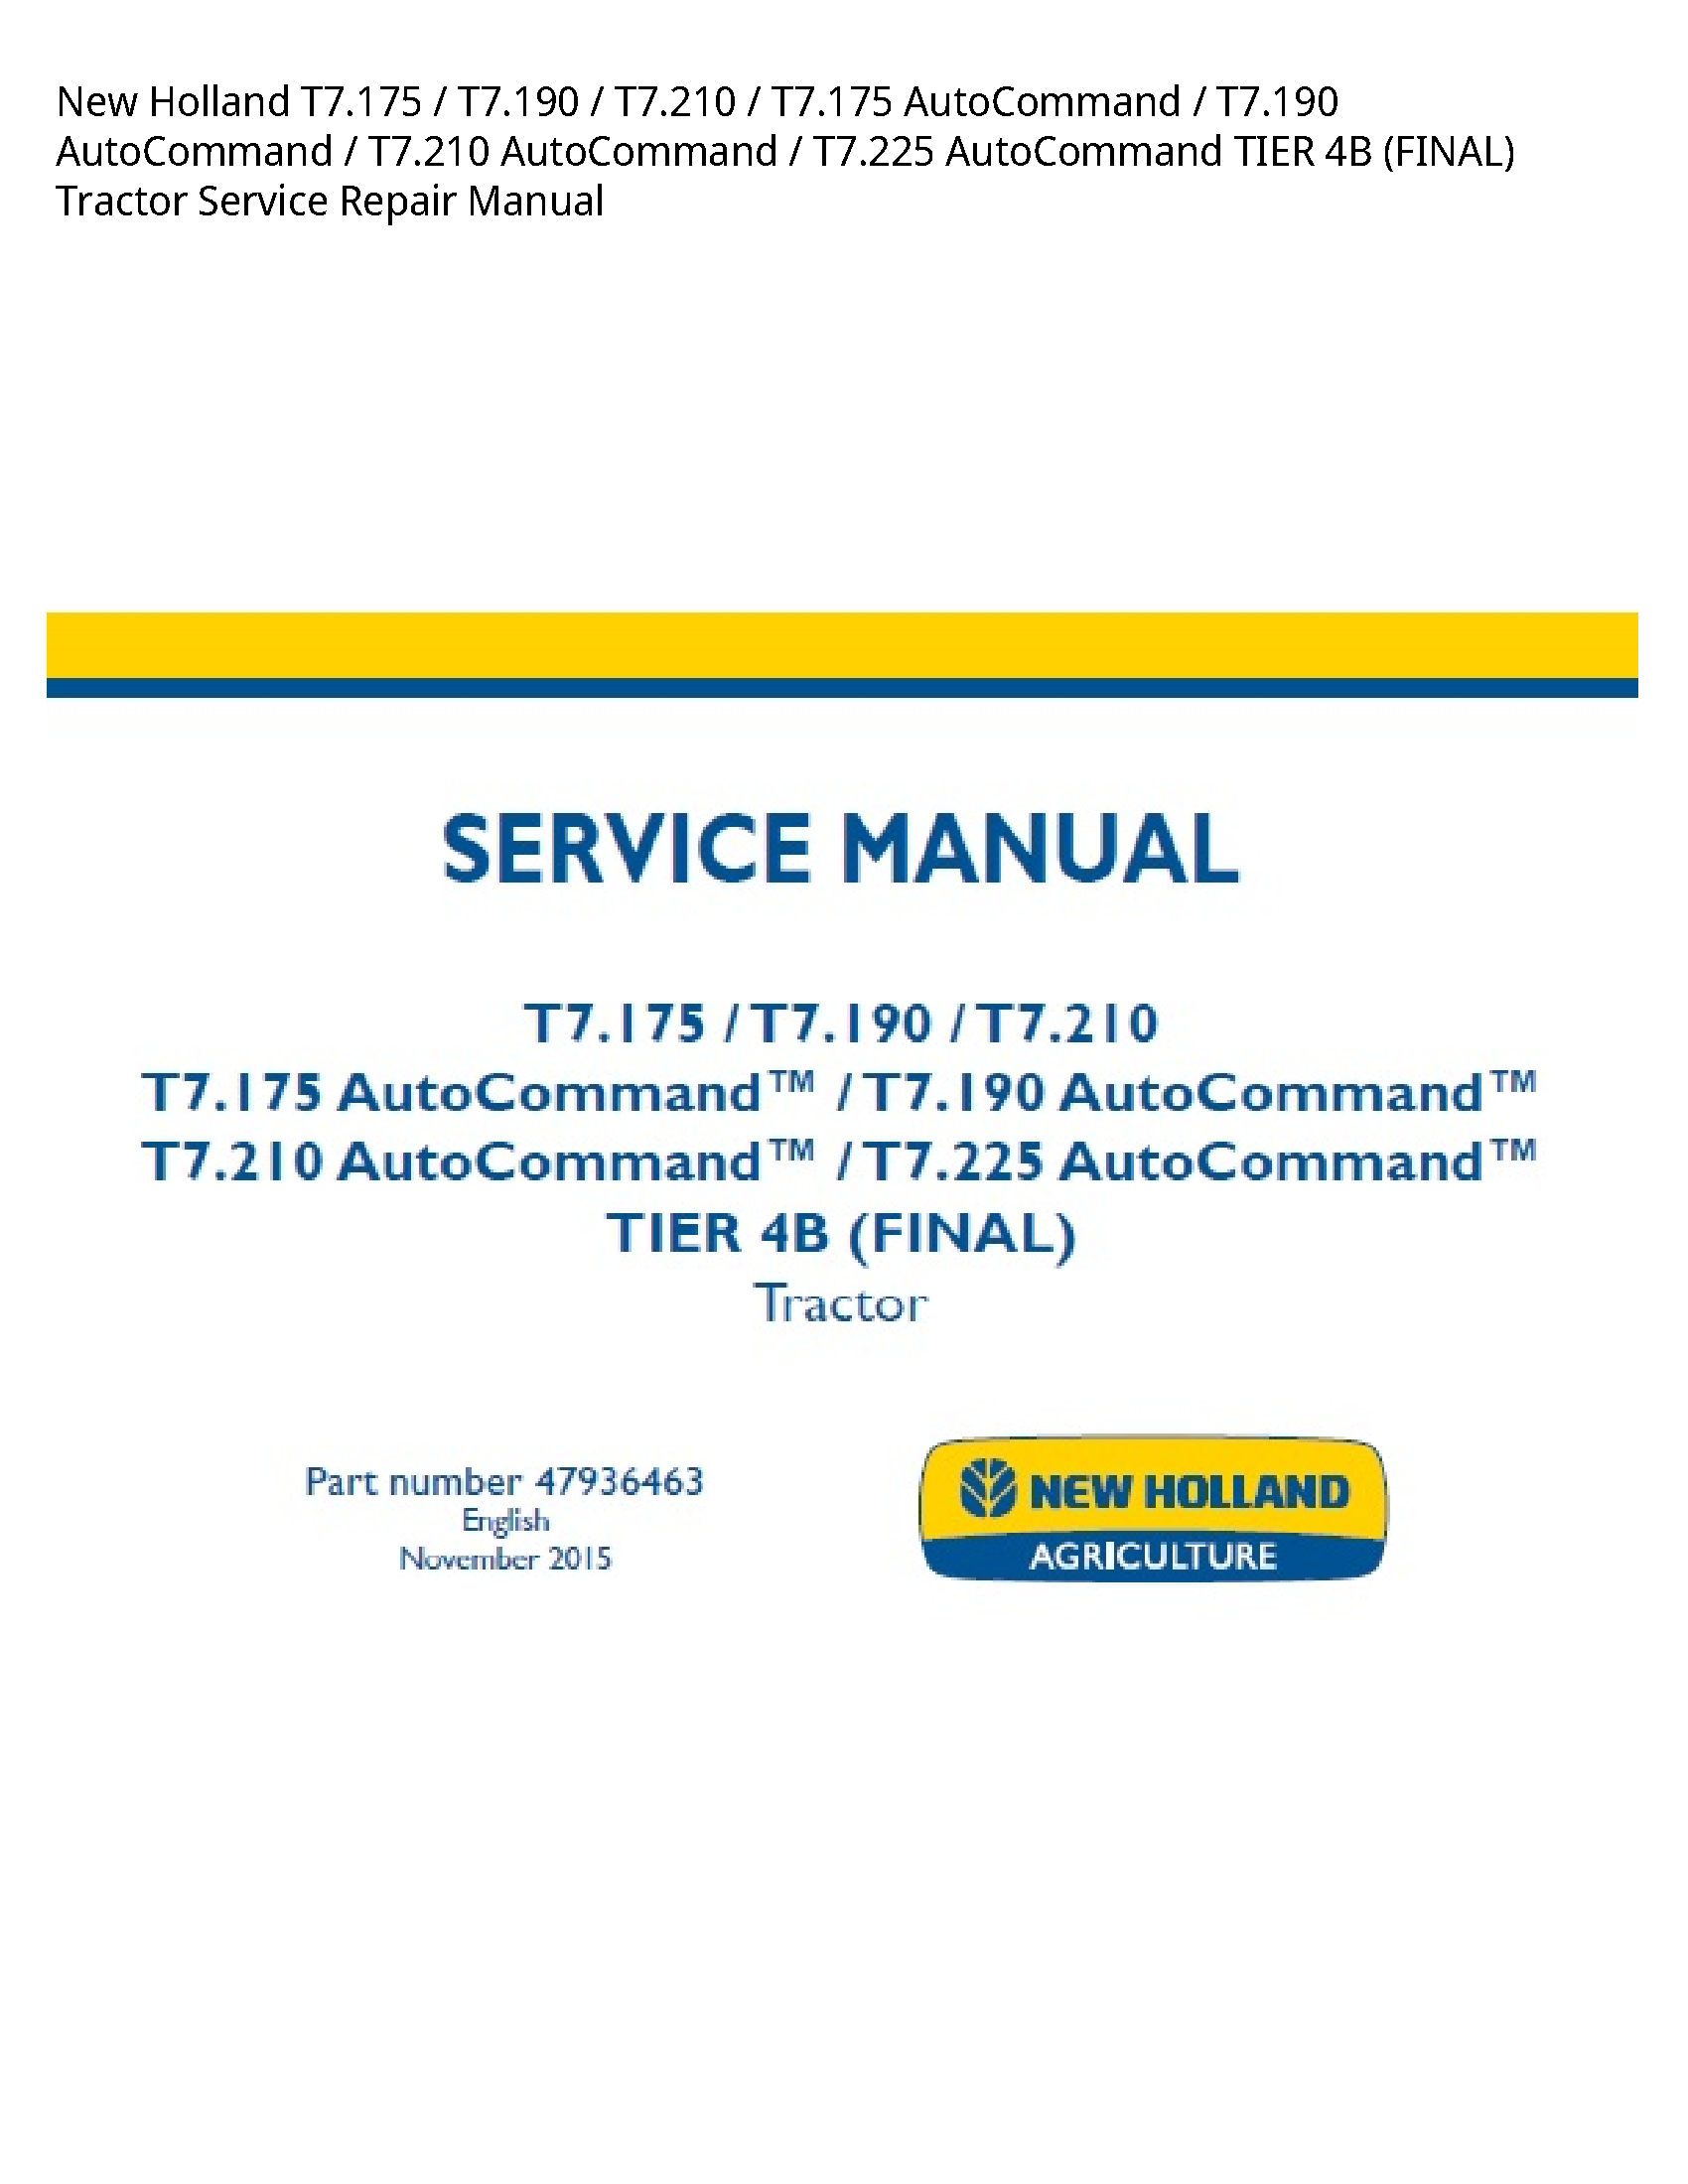 New Holland T7.175 AutoCommand AutoCommand AutoCommand AutoCommand TIER (FINAL) Tractor manual